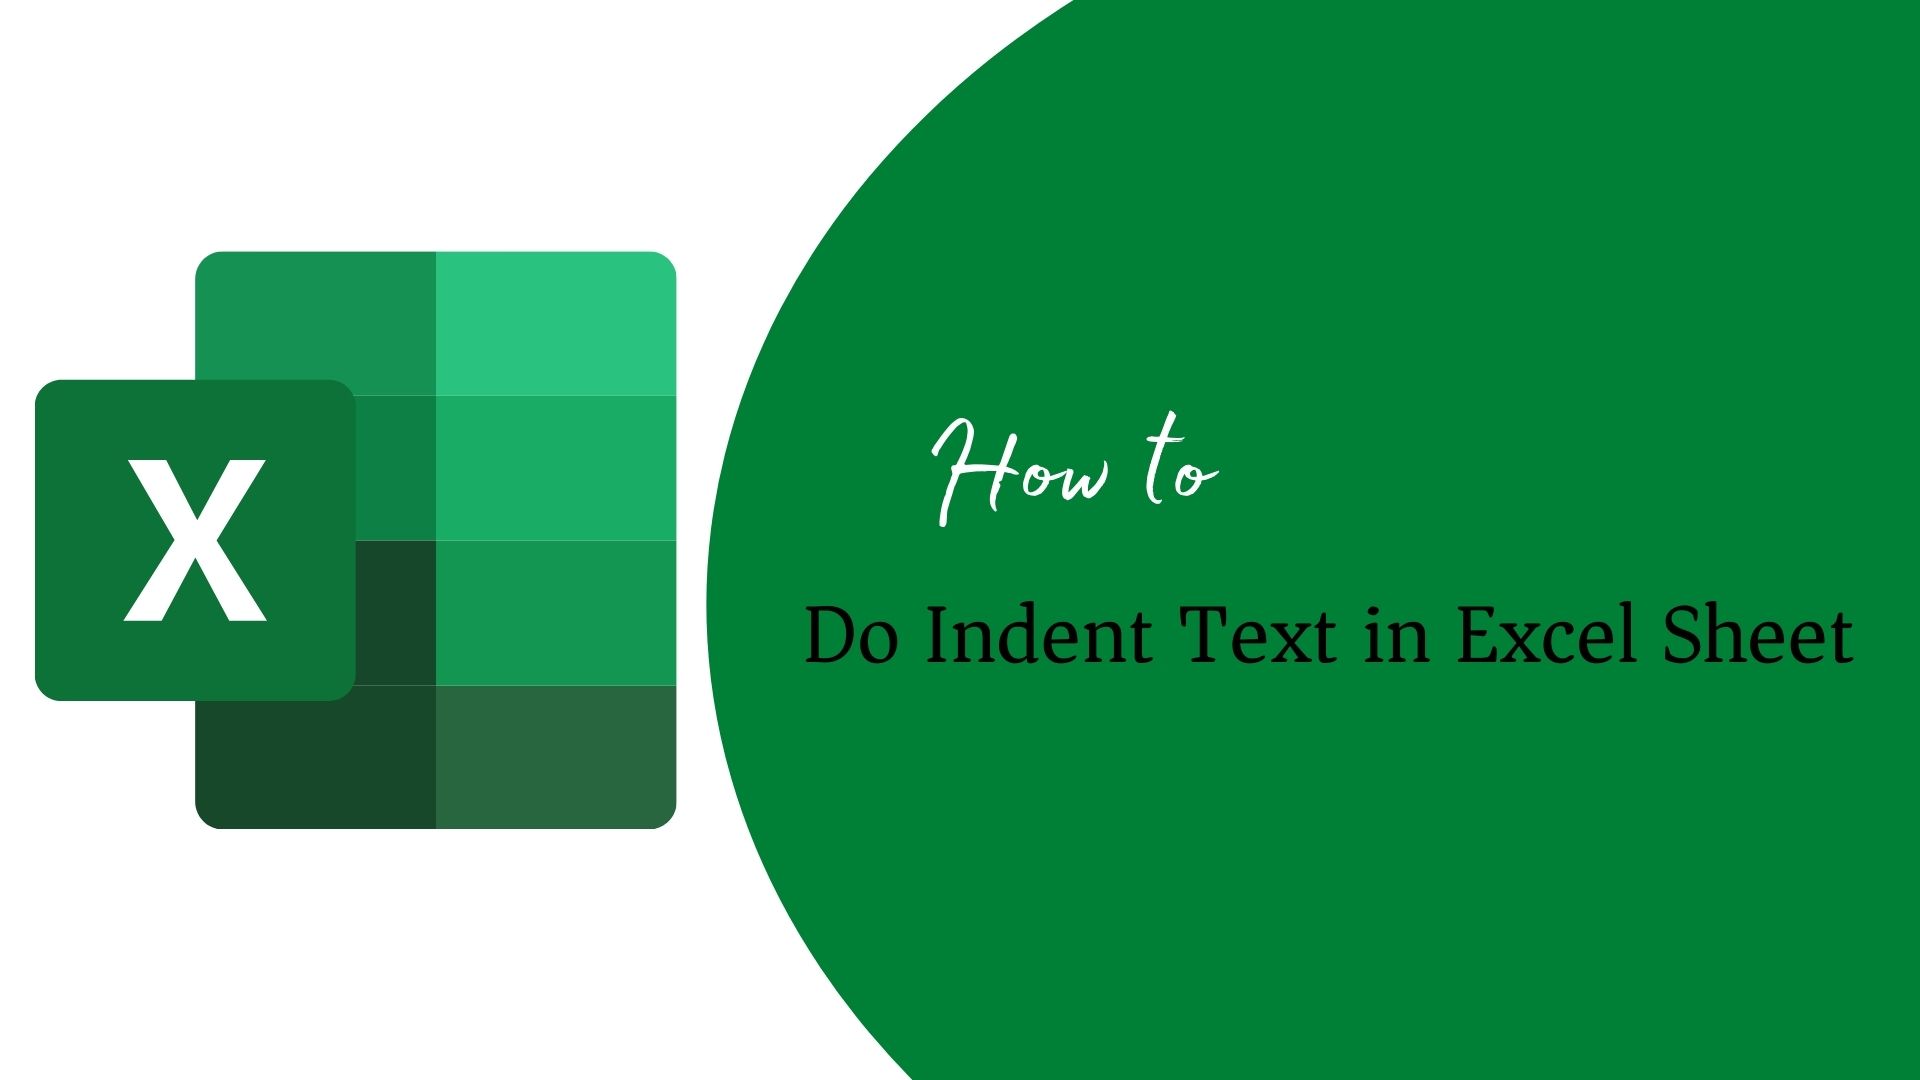 How to do Indent Text in Excel Sheet